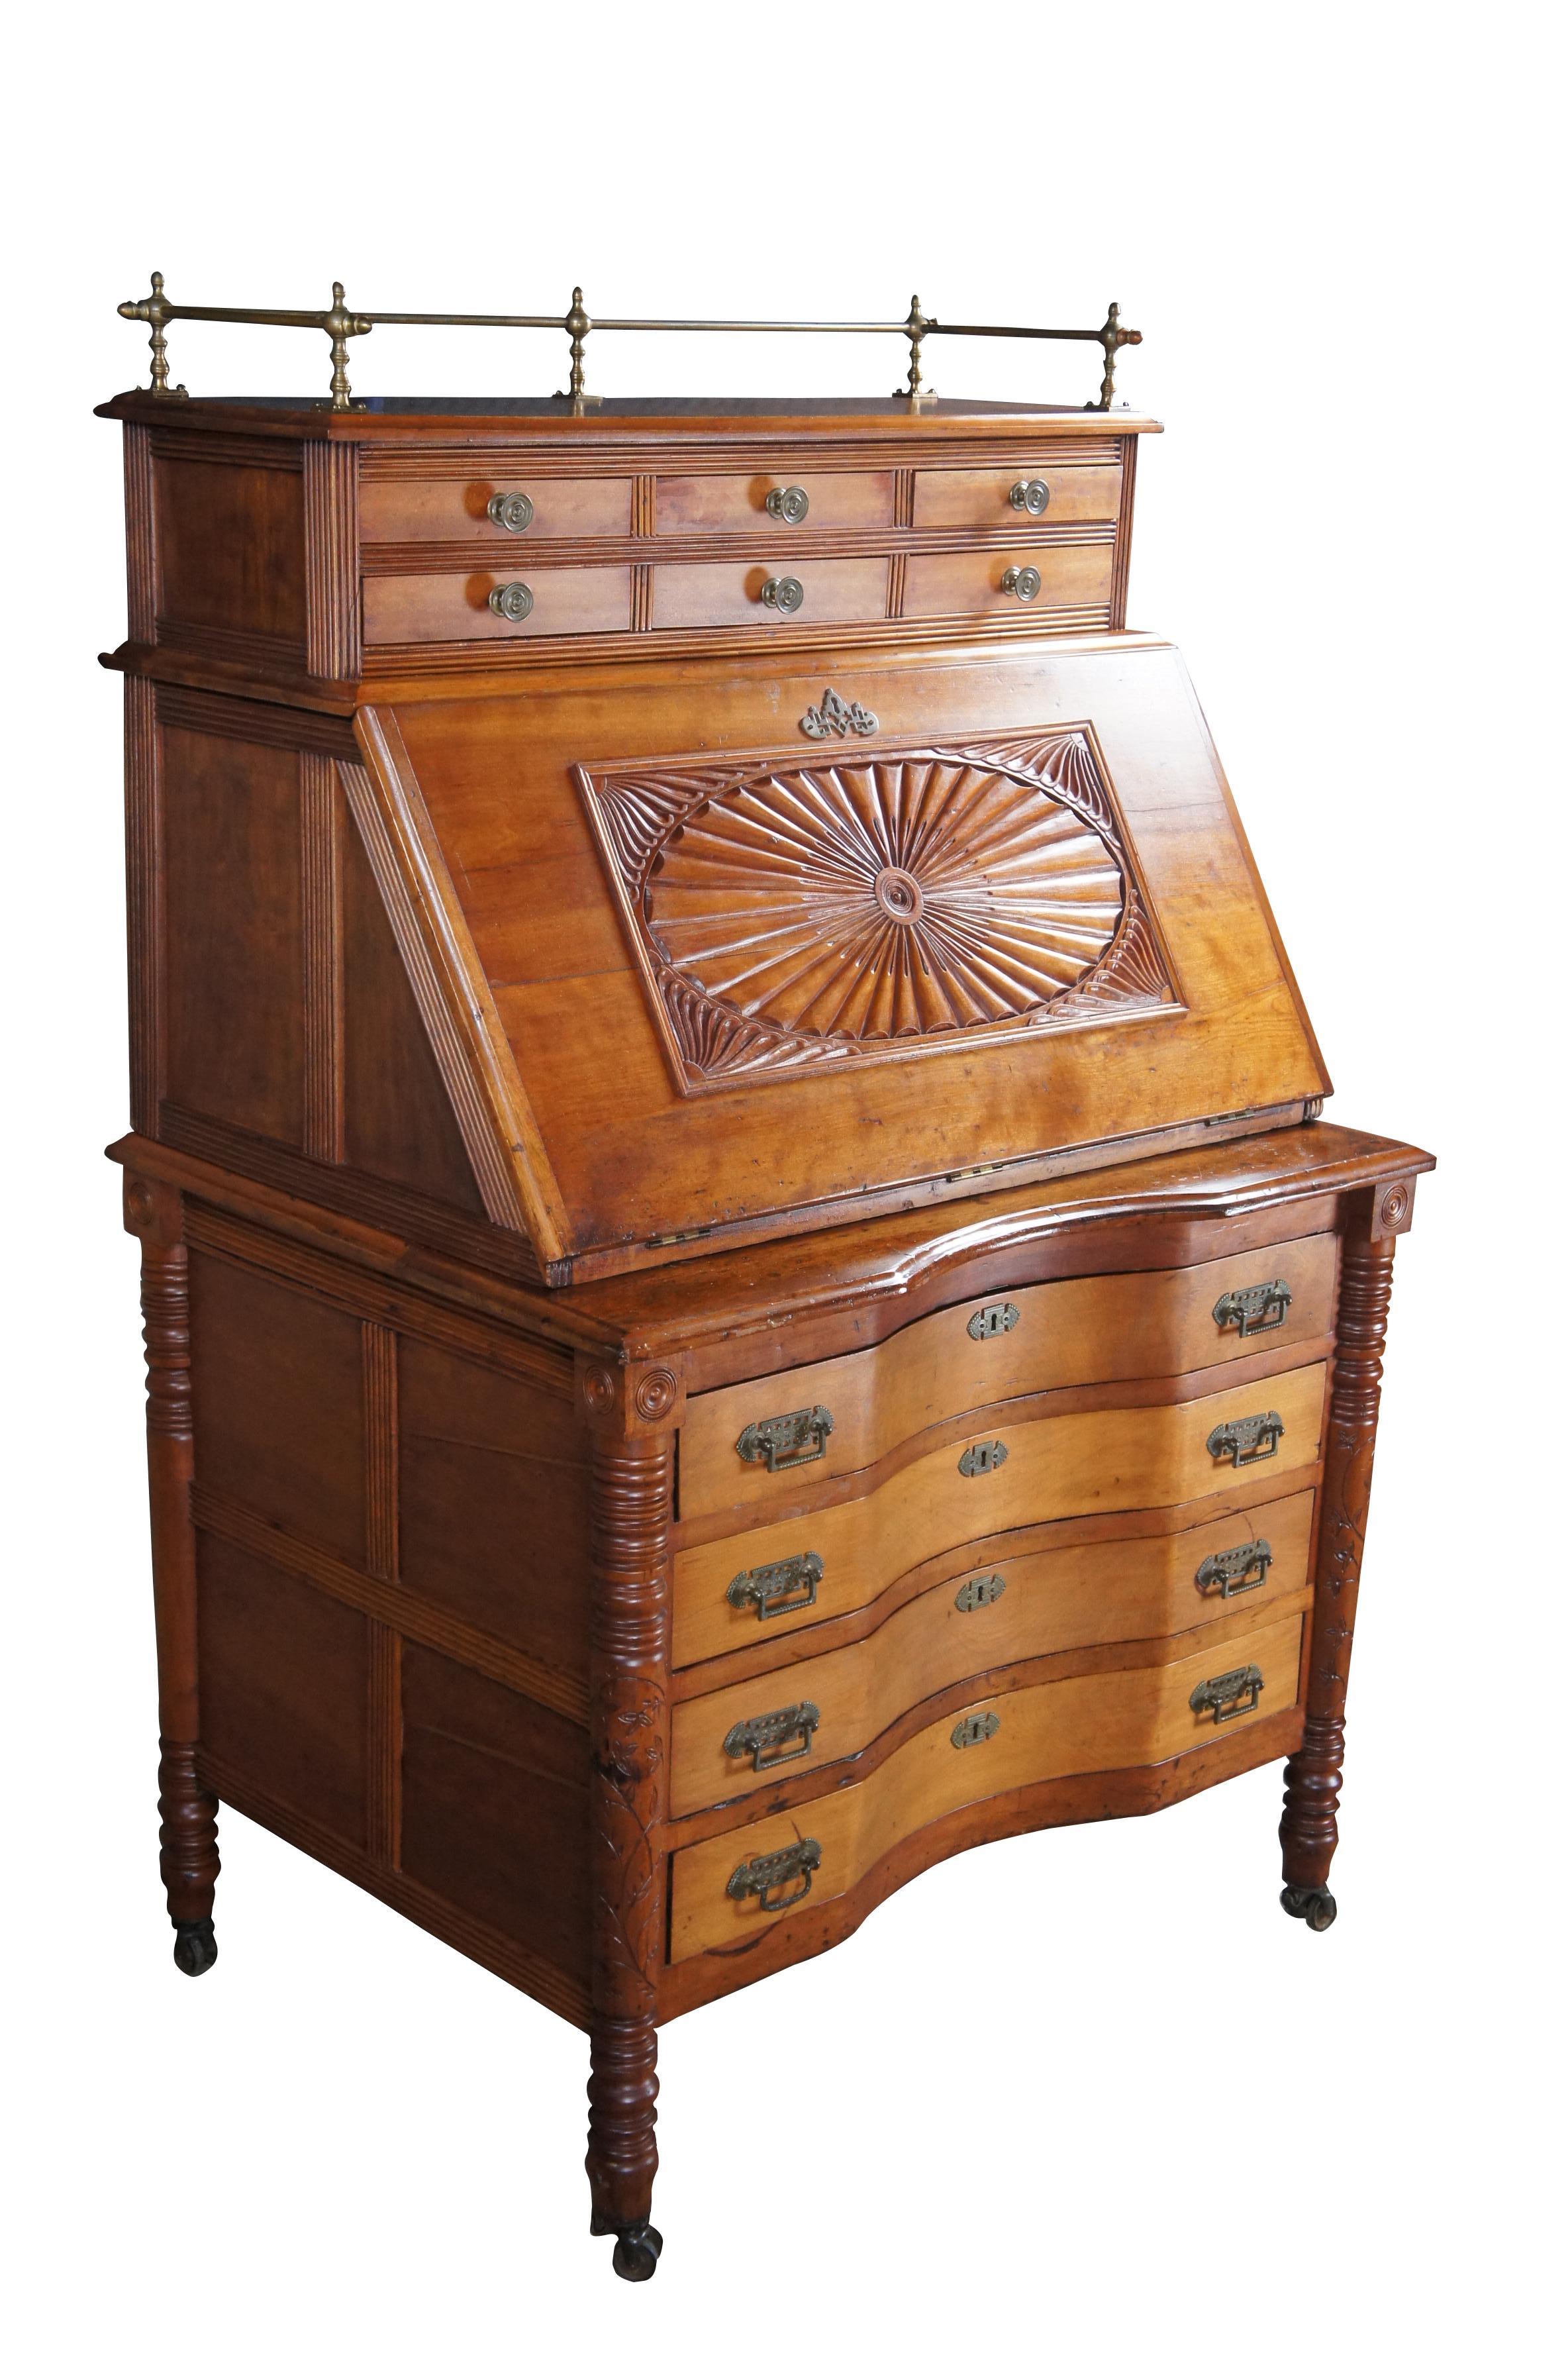 Antique Victorian drop front secretary or library writing desk.  Made of cherry featuring Eastlake styling with upper brass gallery and six apothecary style drawers over a slanted drop front that opens to multiple cubbies and storage shelves.  The